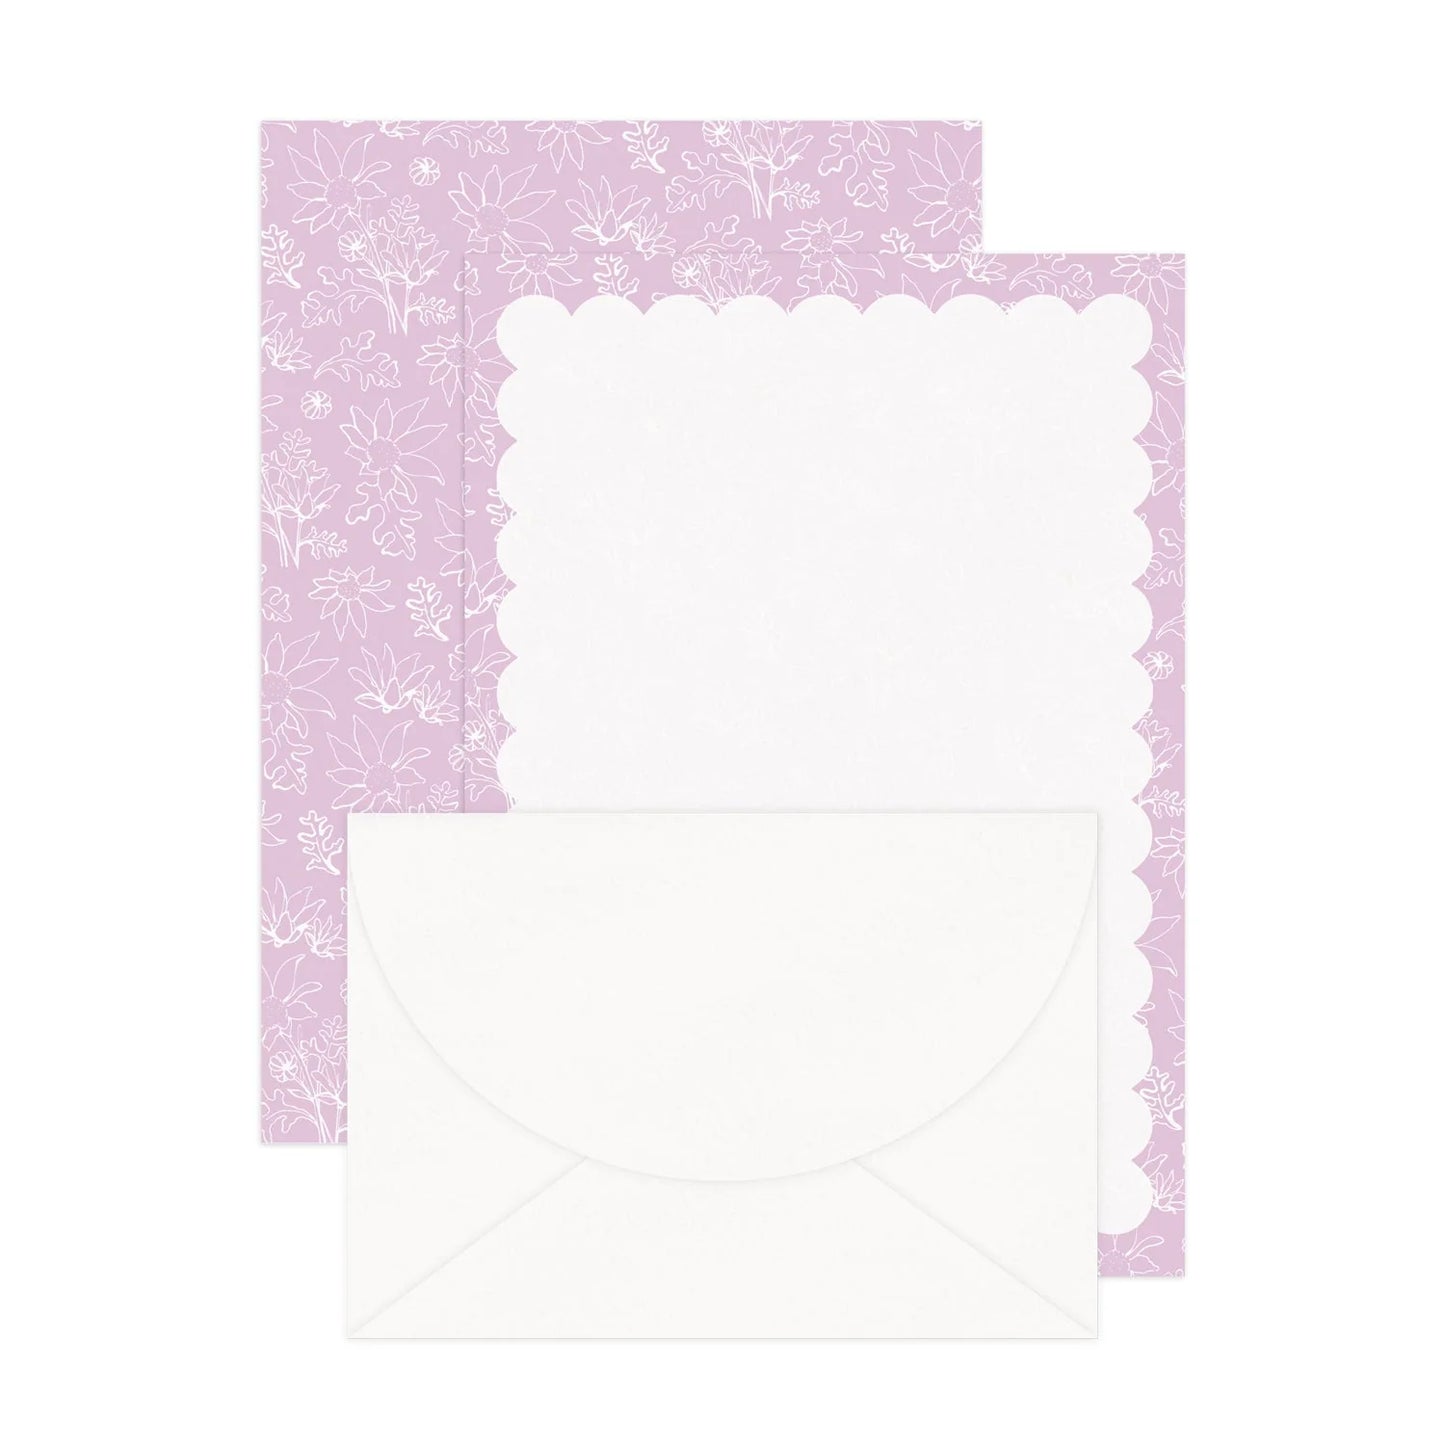 'Lilac Flannel Flowers' Blank Letter Writing Stationery Set